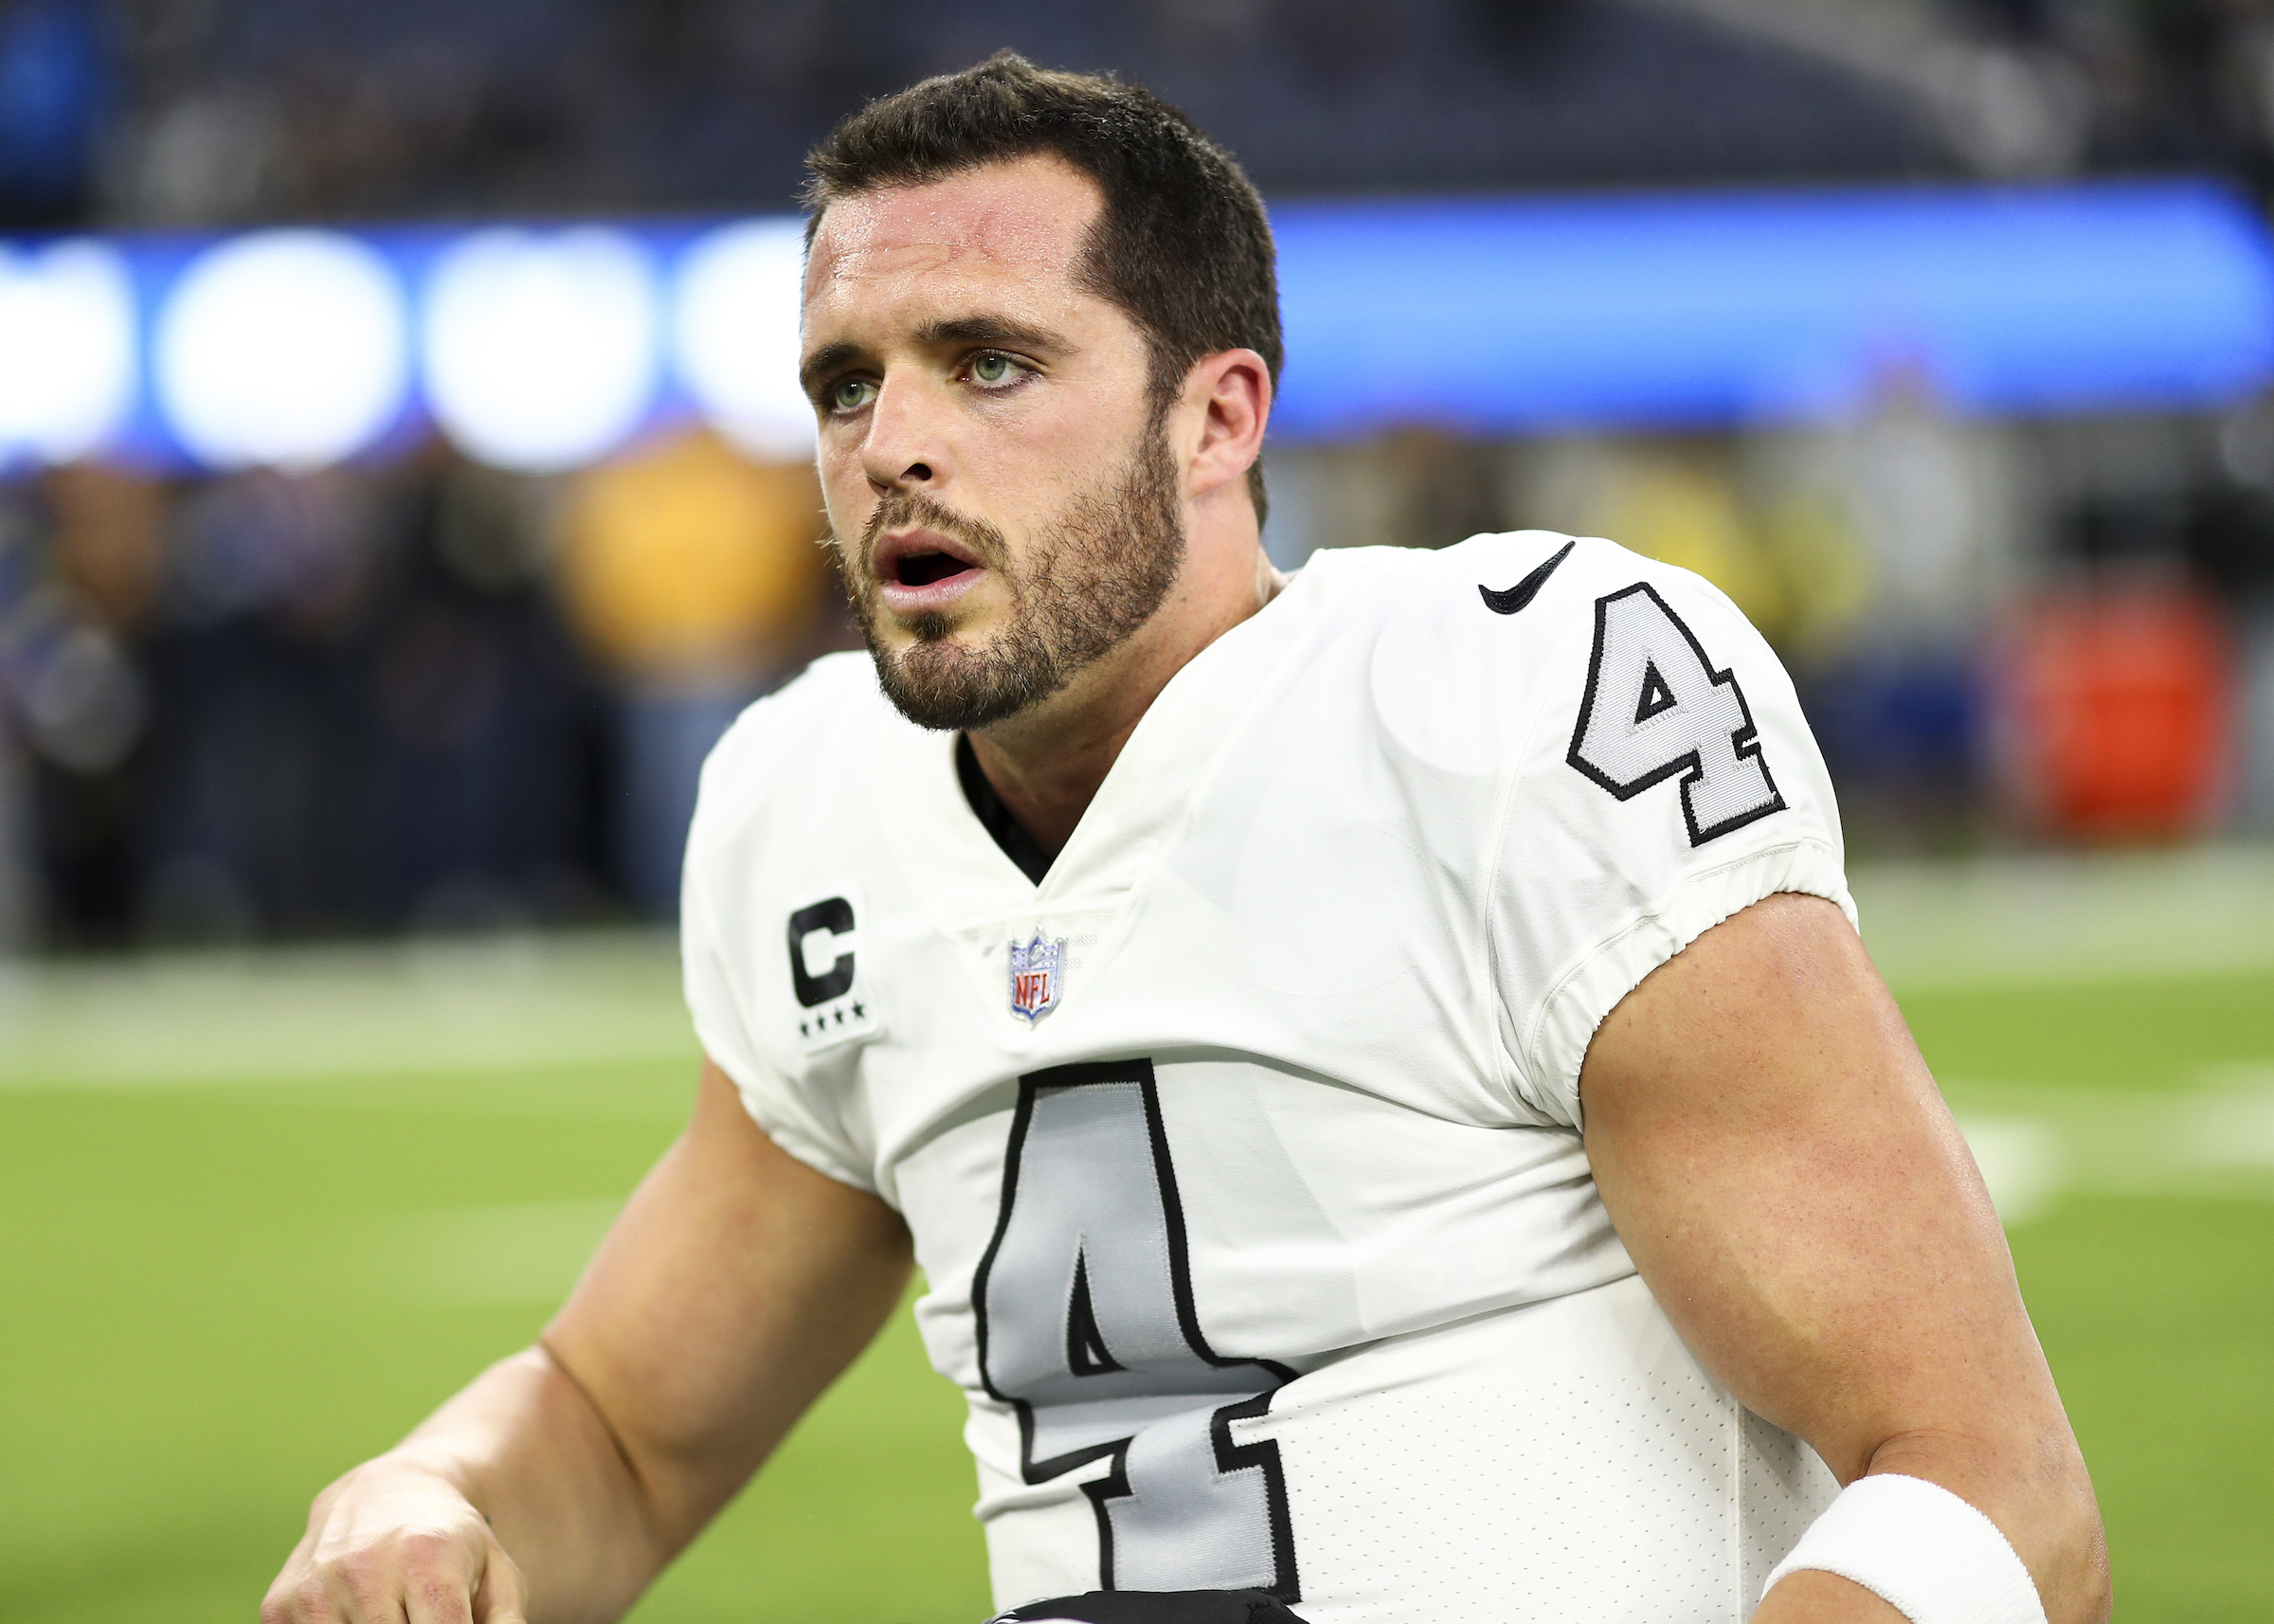 INGLEWOOD, CA - DECEMBER 8: Derek Carr #4 of the Las Vegas Raiders yells to teammates while stretching prior to an NFL football game against the Los Angeles Rams at SoFi Stadium on December 8, 2022 in Inglewood, California. (Photo by Kevin Sabitus/Getty Images)